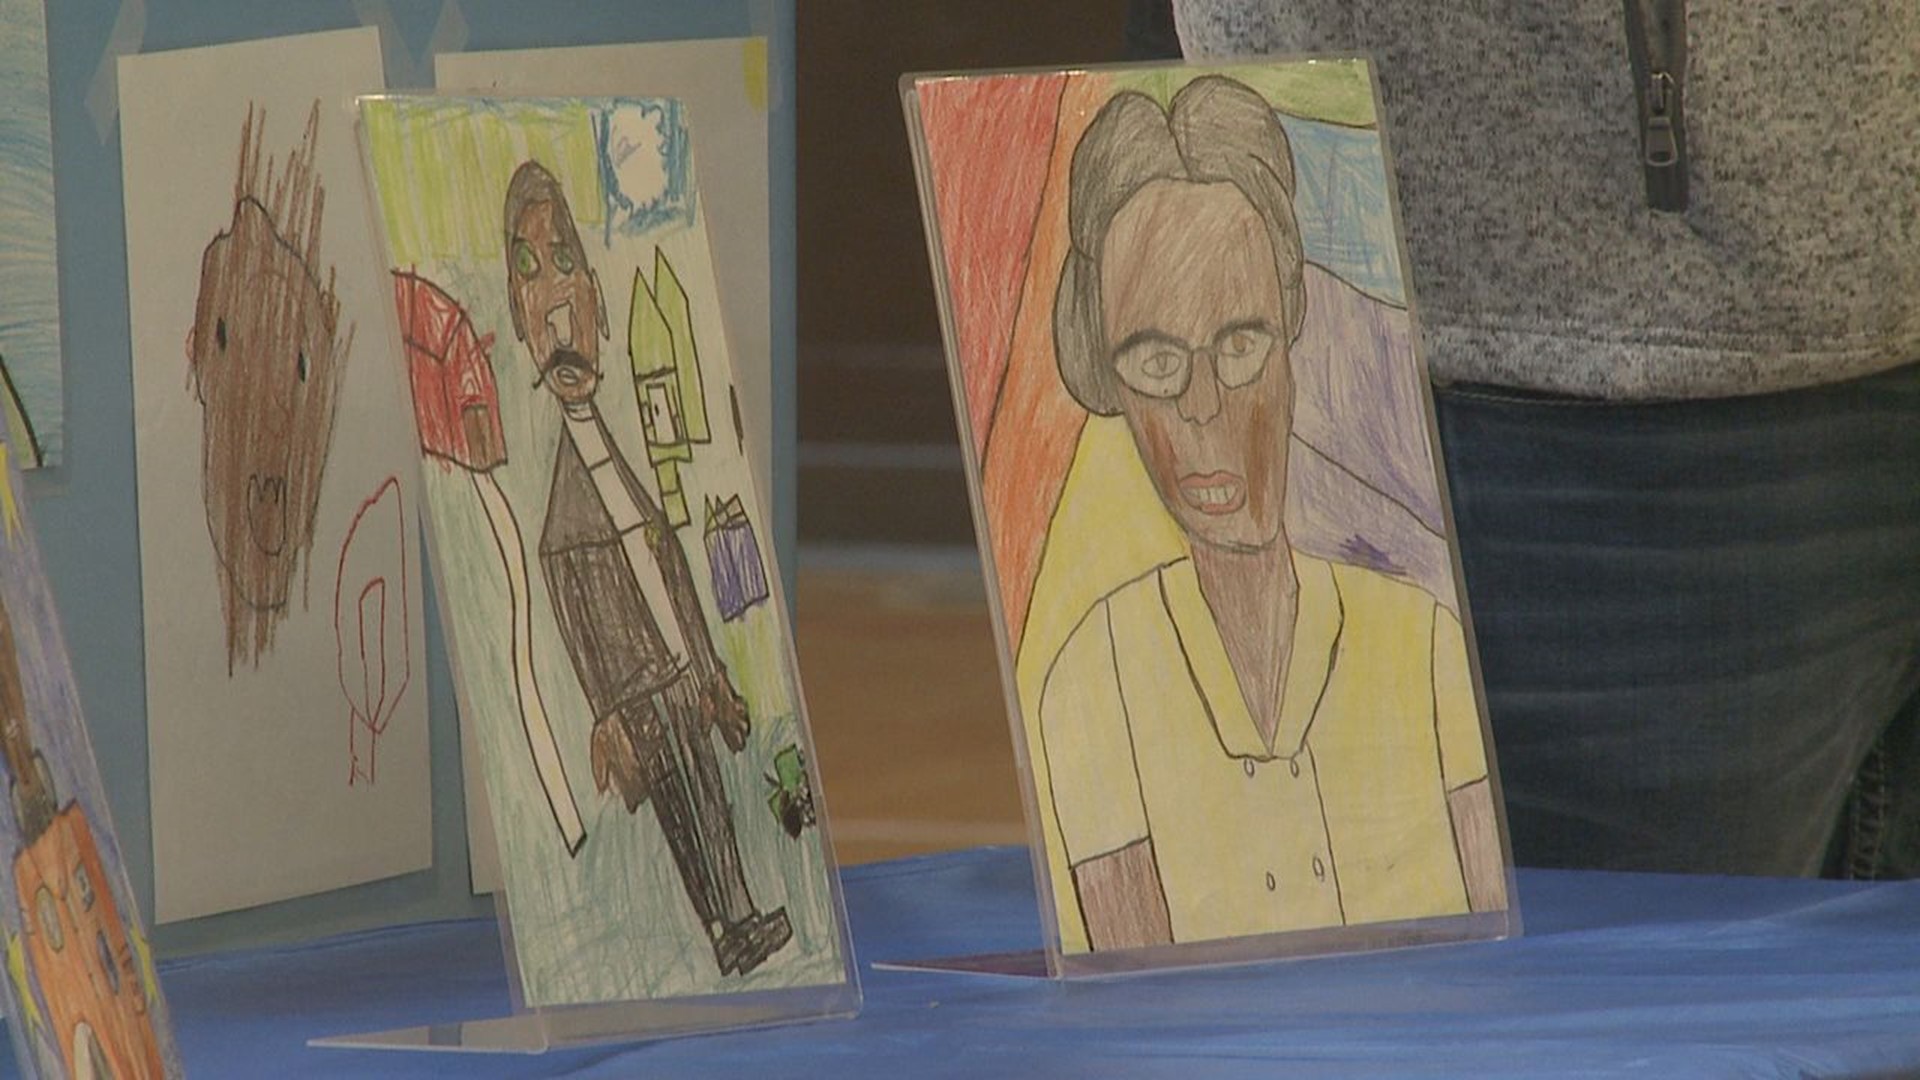 The 4th annual Black History Month Art Contest recognized three winners from the Boys & Girls Clubs of the Mississippi Valley.